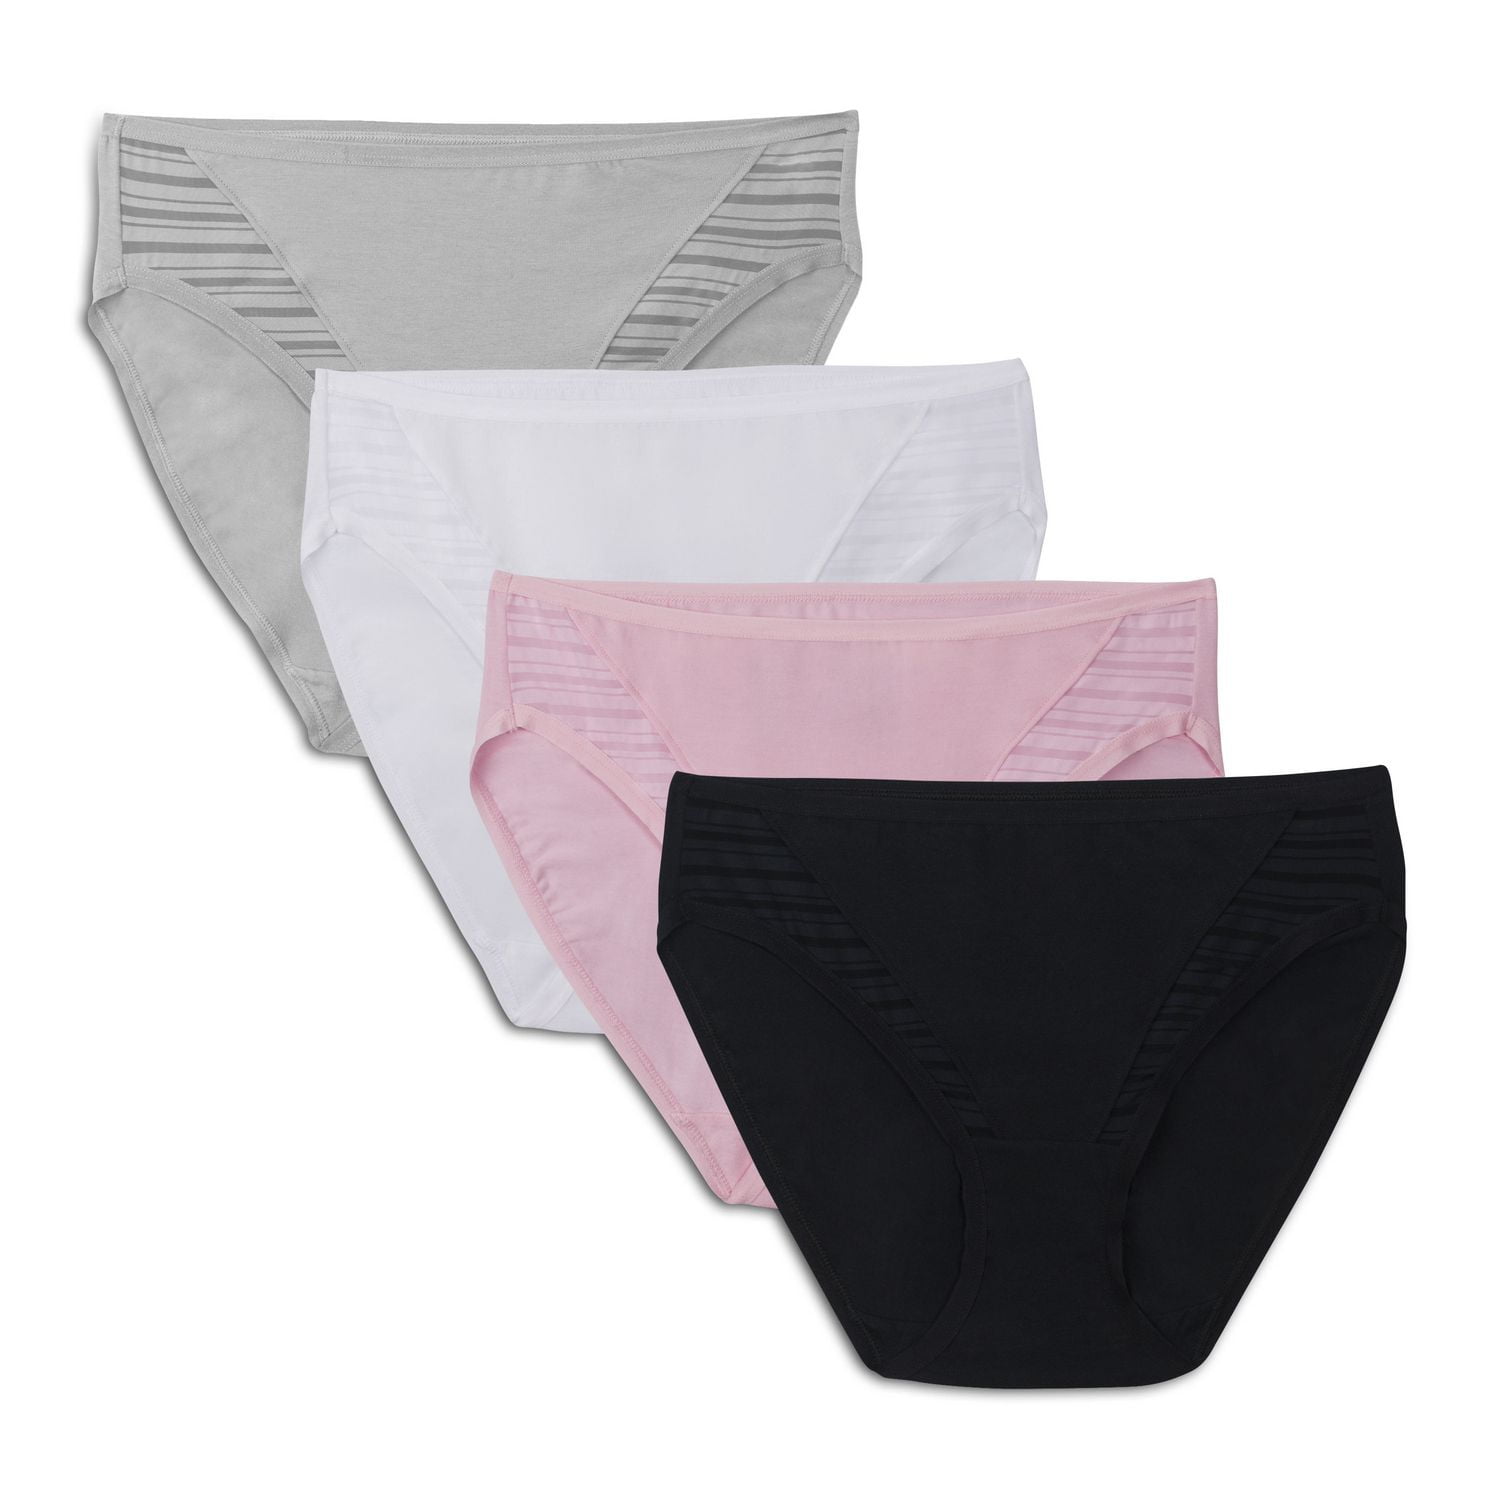  Fruit Of The Loom Womens Underwear Moisture Wicking  Coolblend Panties, Hi-Cut - Fashion Assorted, Small